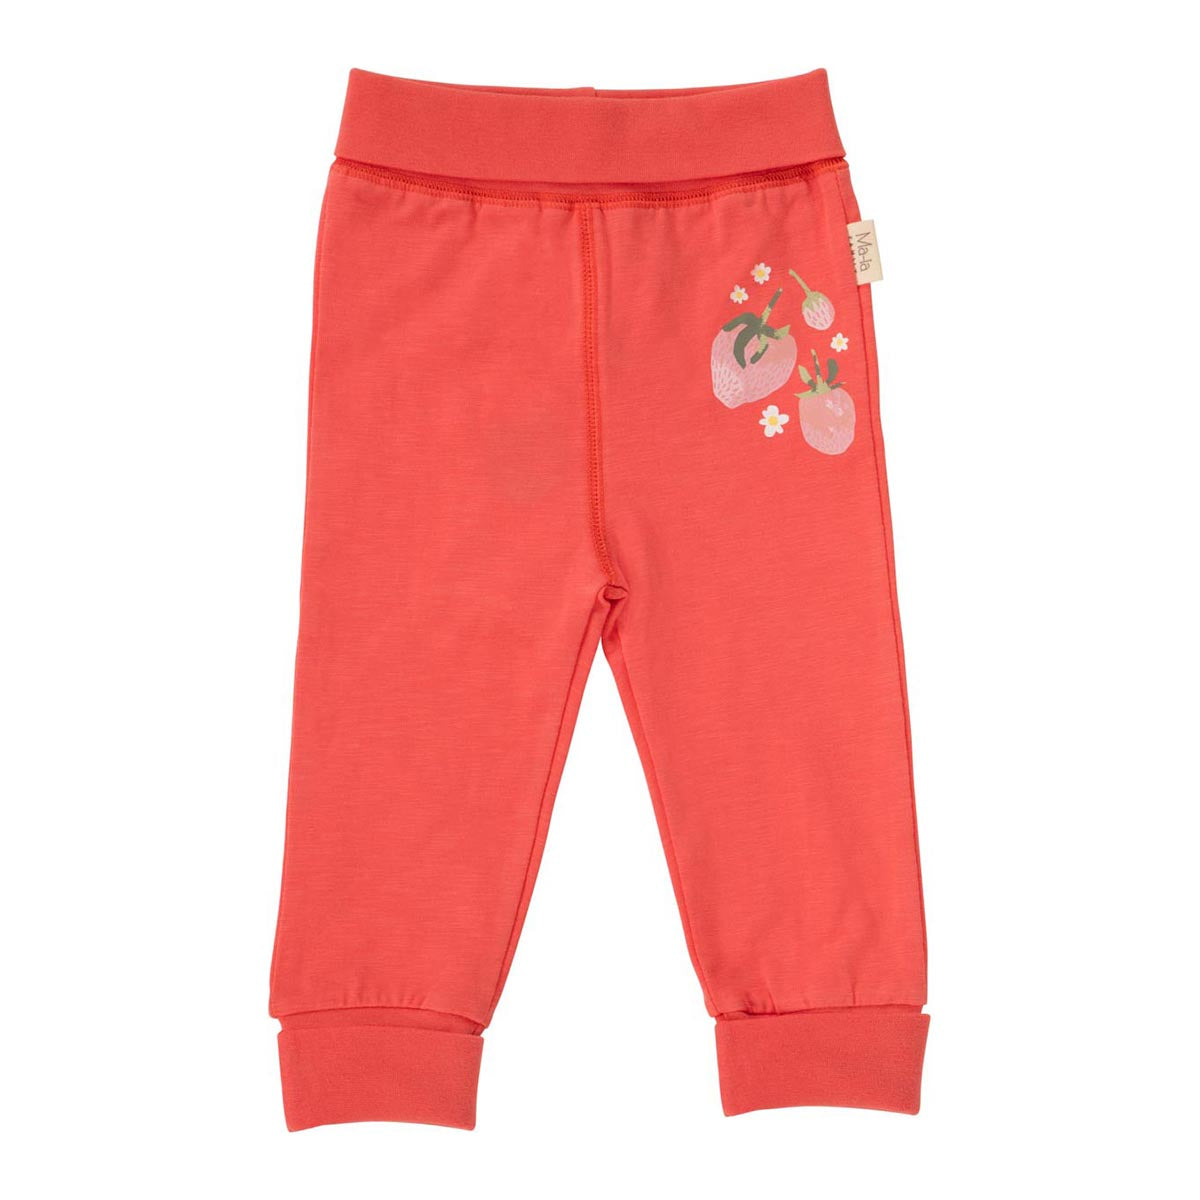 Fragola Trousers, coral